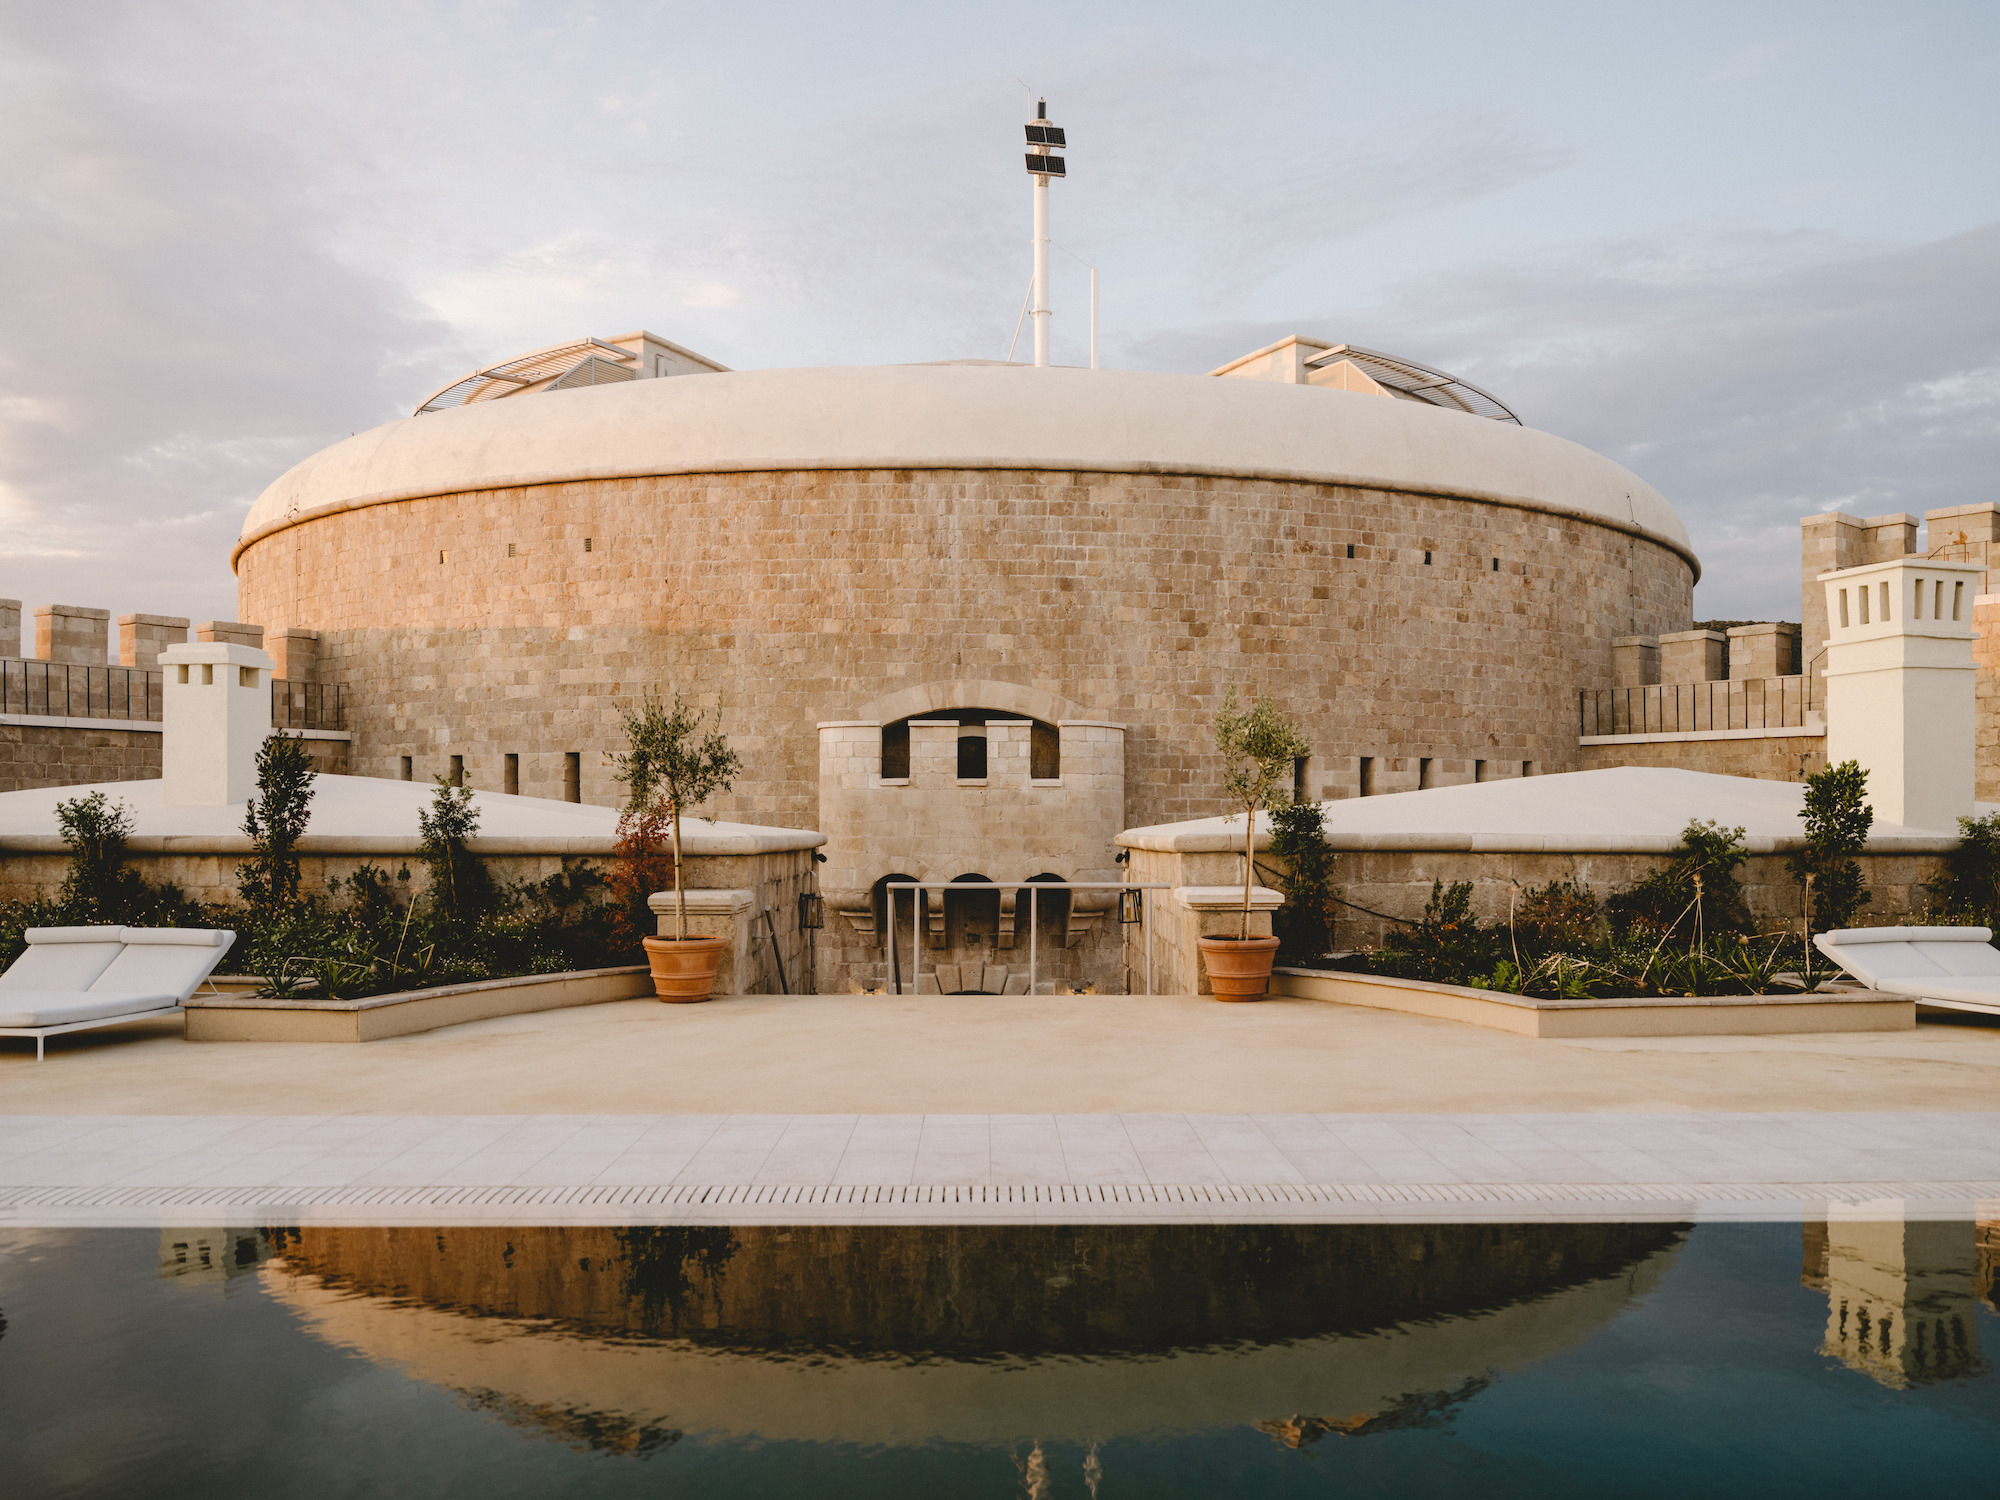 Mamula Island hotel is a former fortress dating from the 1850s, and has been restored from its former derelict state into a luxurious escape by architecture firm MCM London and interior designer Piotr Wisniewski of Berlin’s weStudio - Effect Magazine